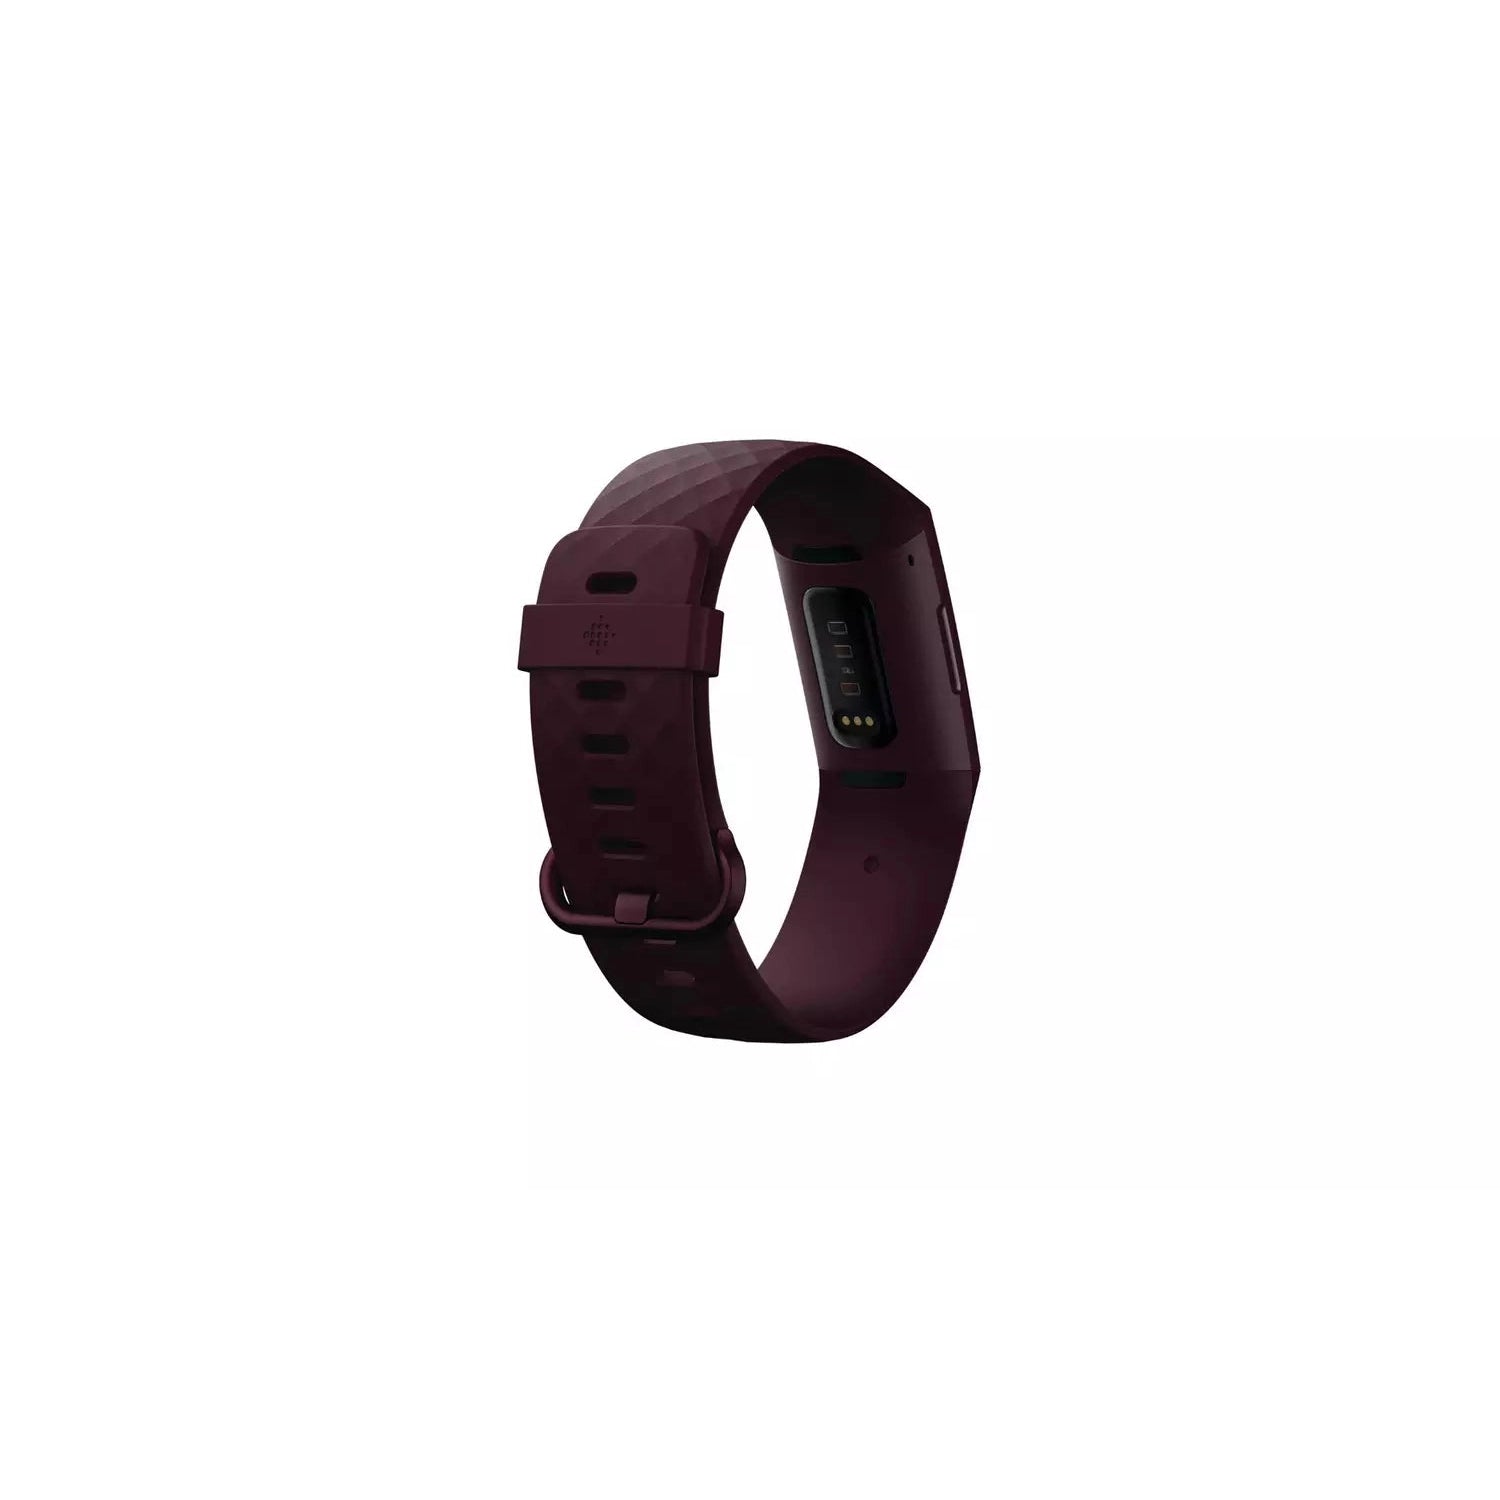 Fitbit Charge 4 Advanced Fitness Tracker with GPS - Rosewood - Refurbished Excellent